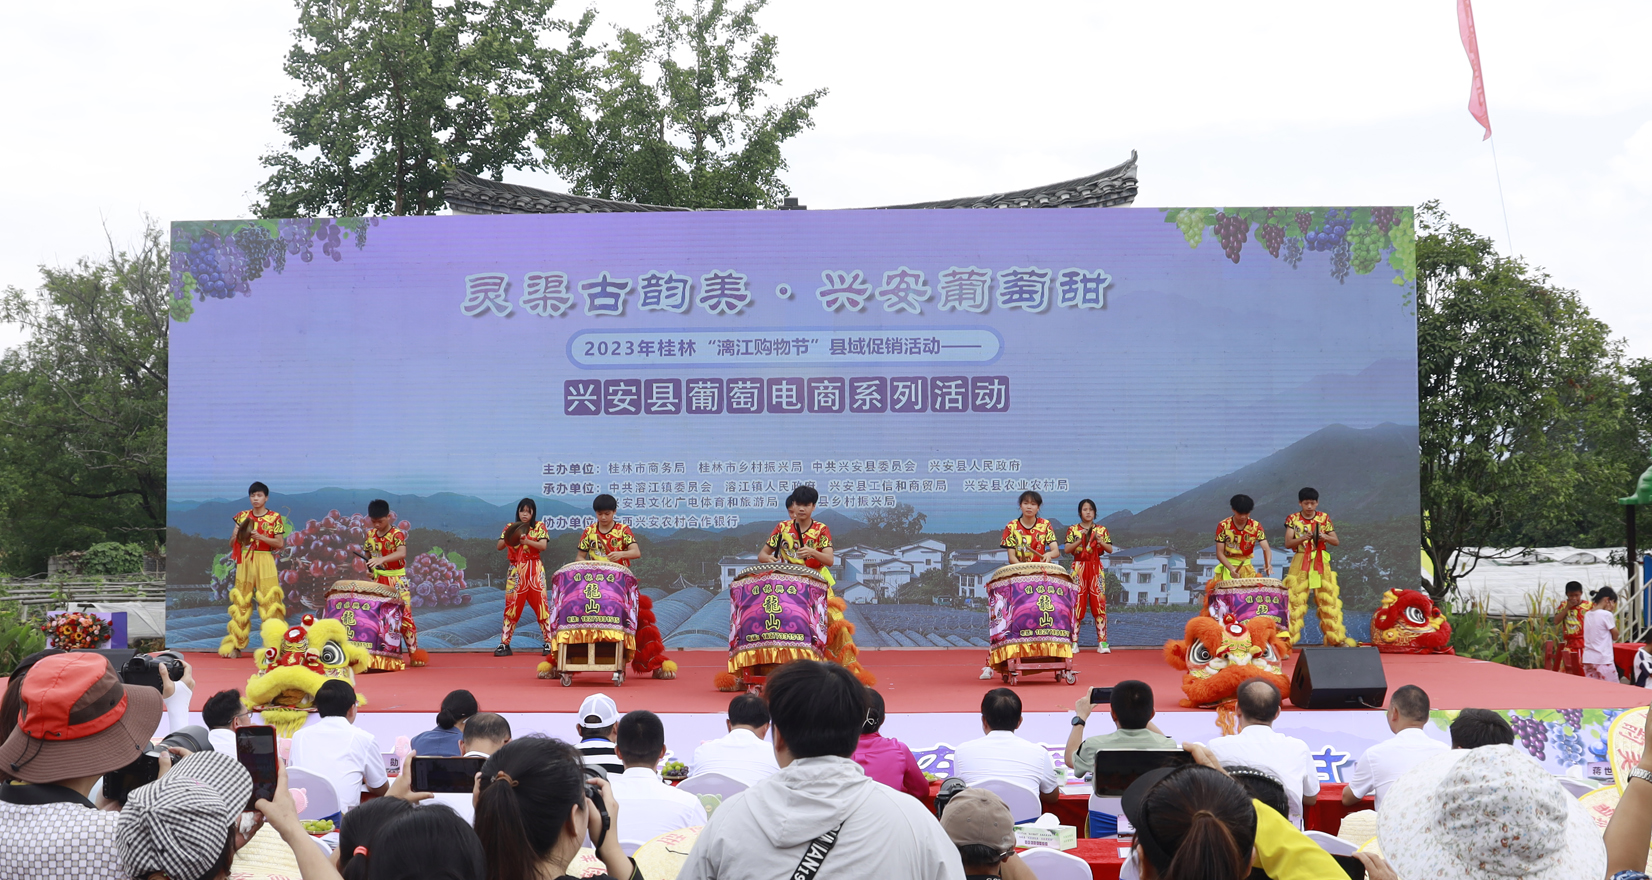 Guilin county promotes local grapes with e-commerce